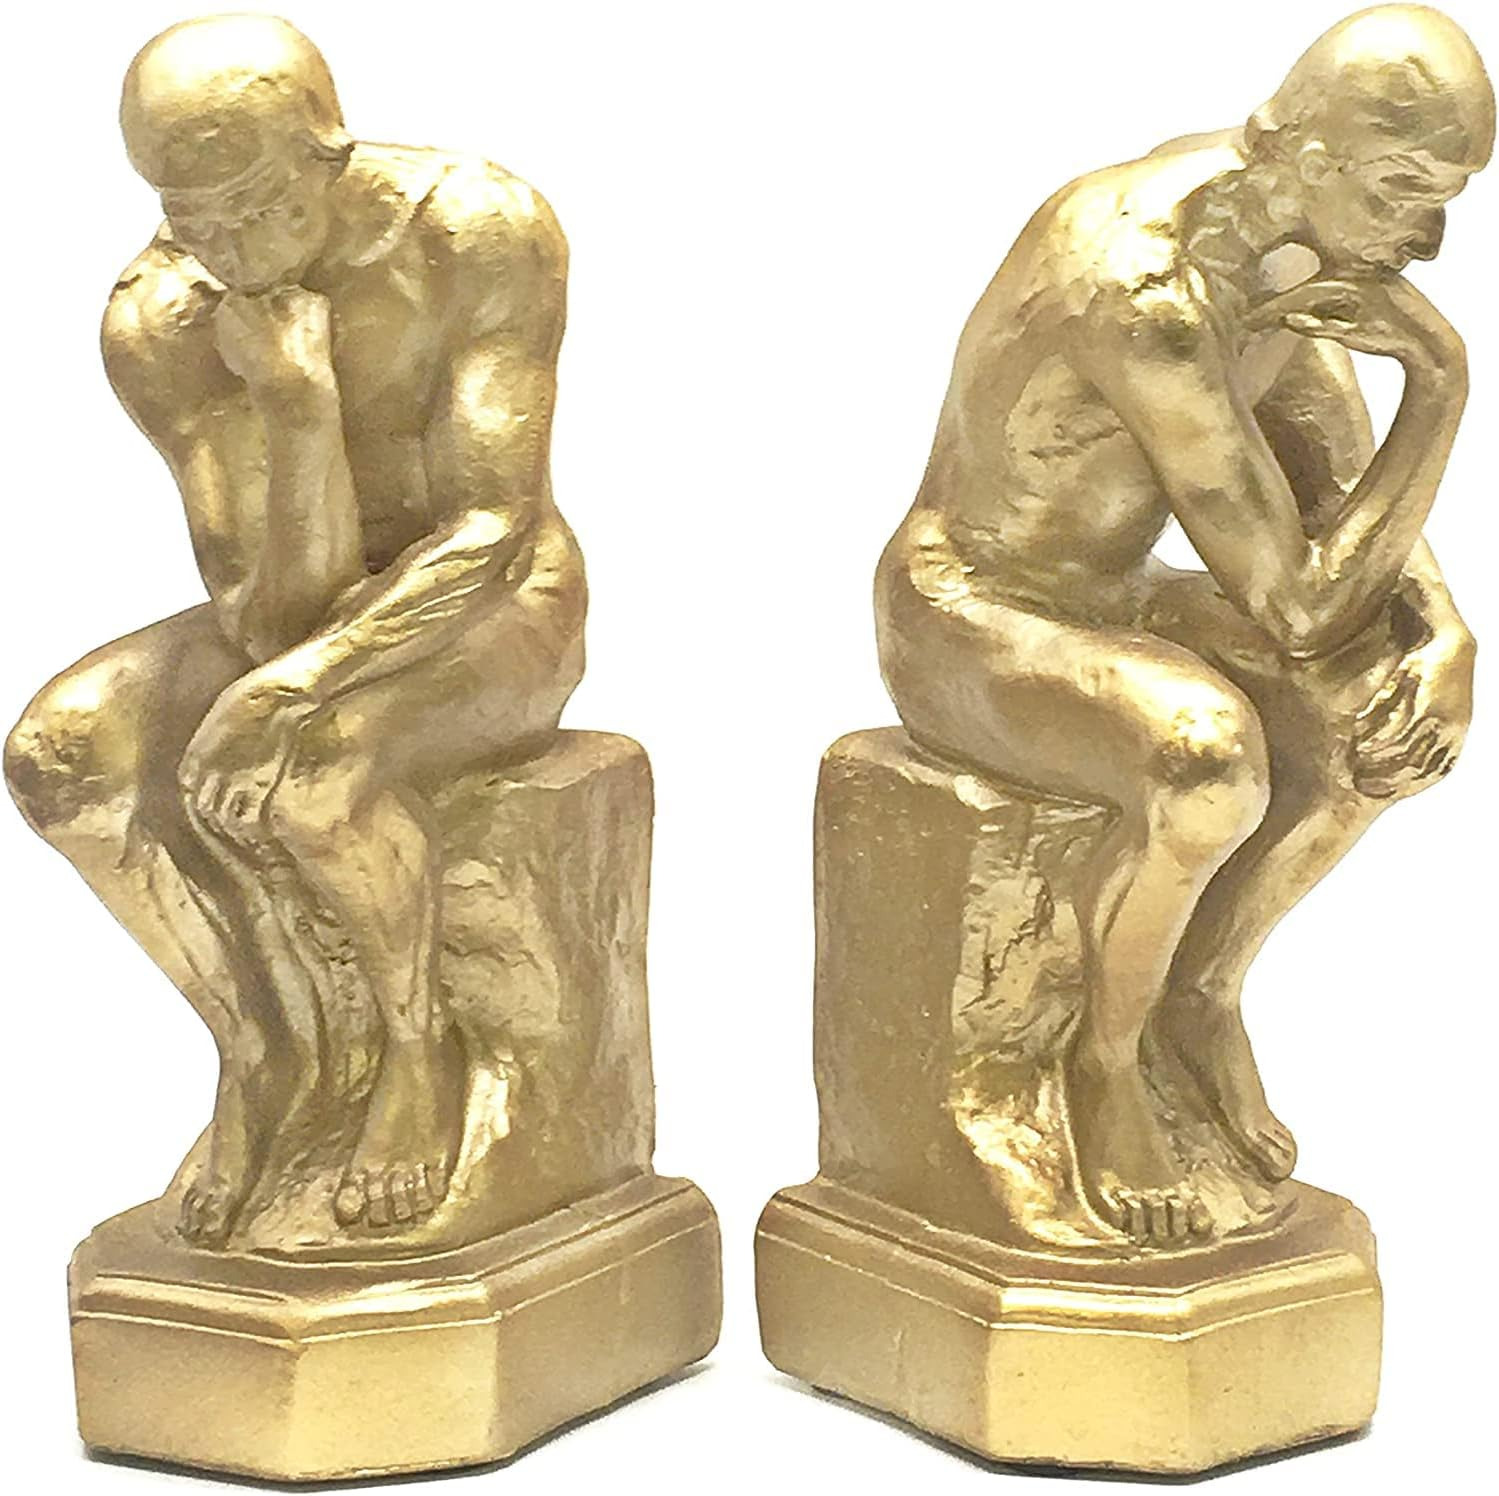 25594 Thinker Bookends 9 Inch Big Vintage Gold Rustic Cool Unique Book Ends Heav